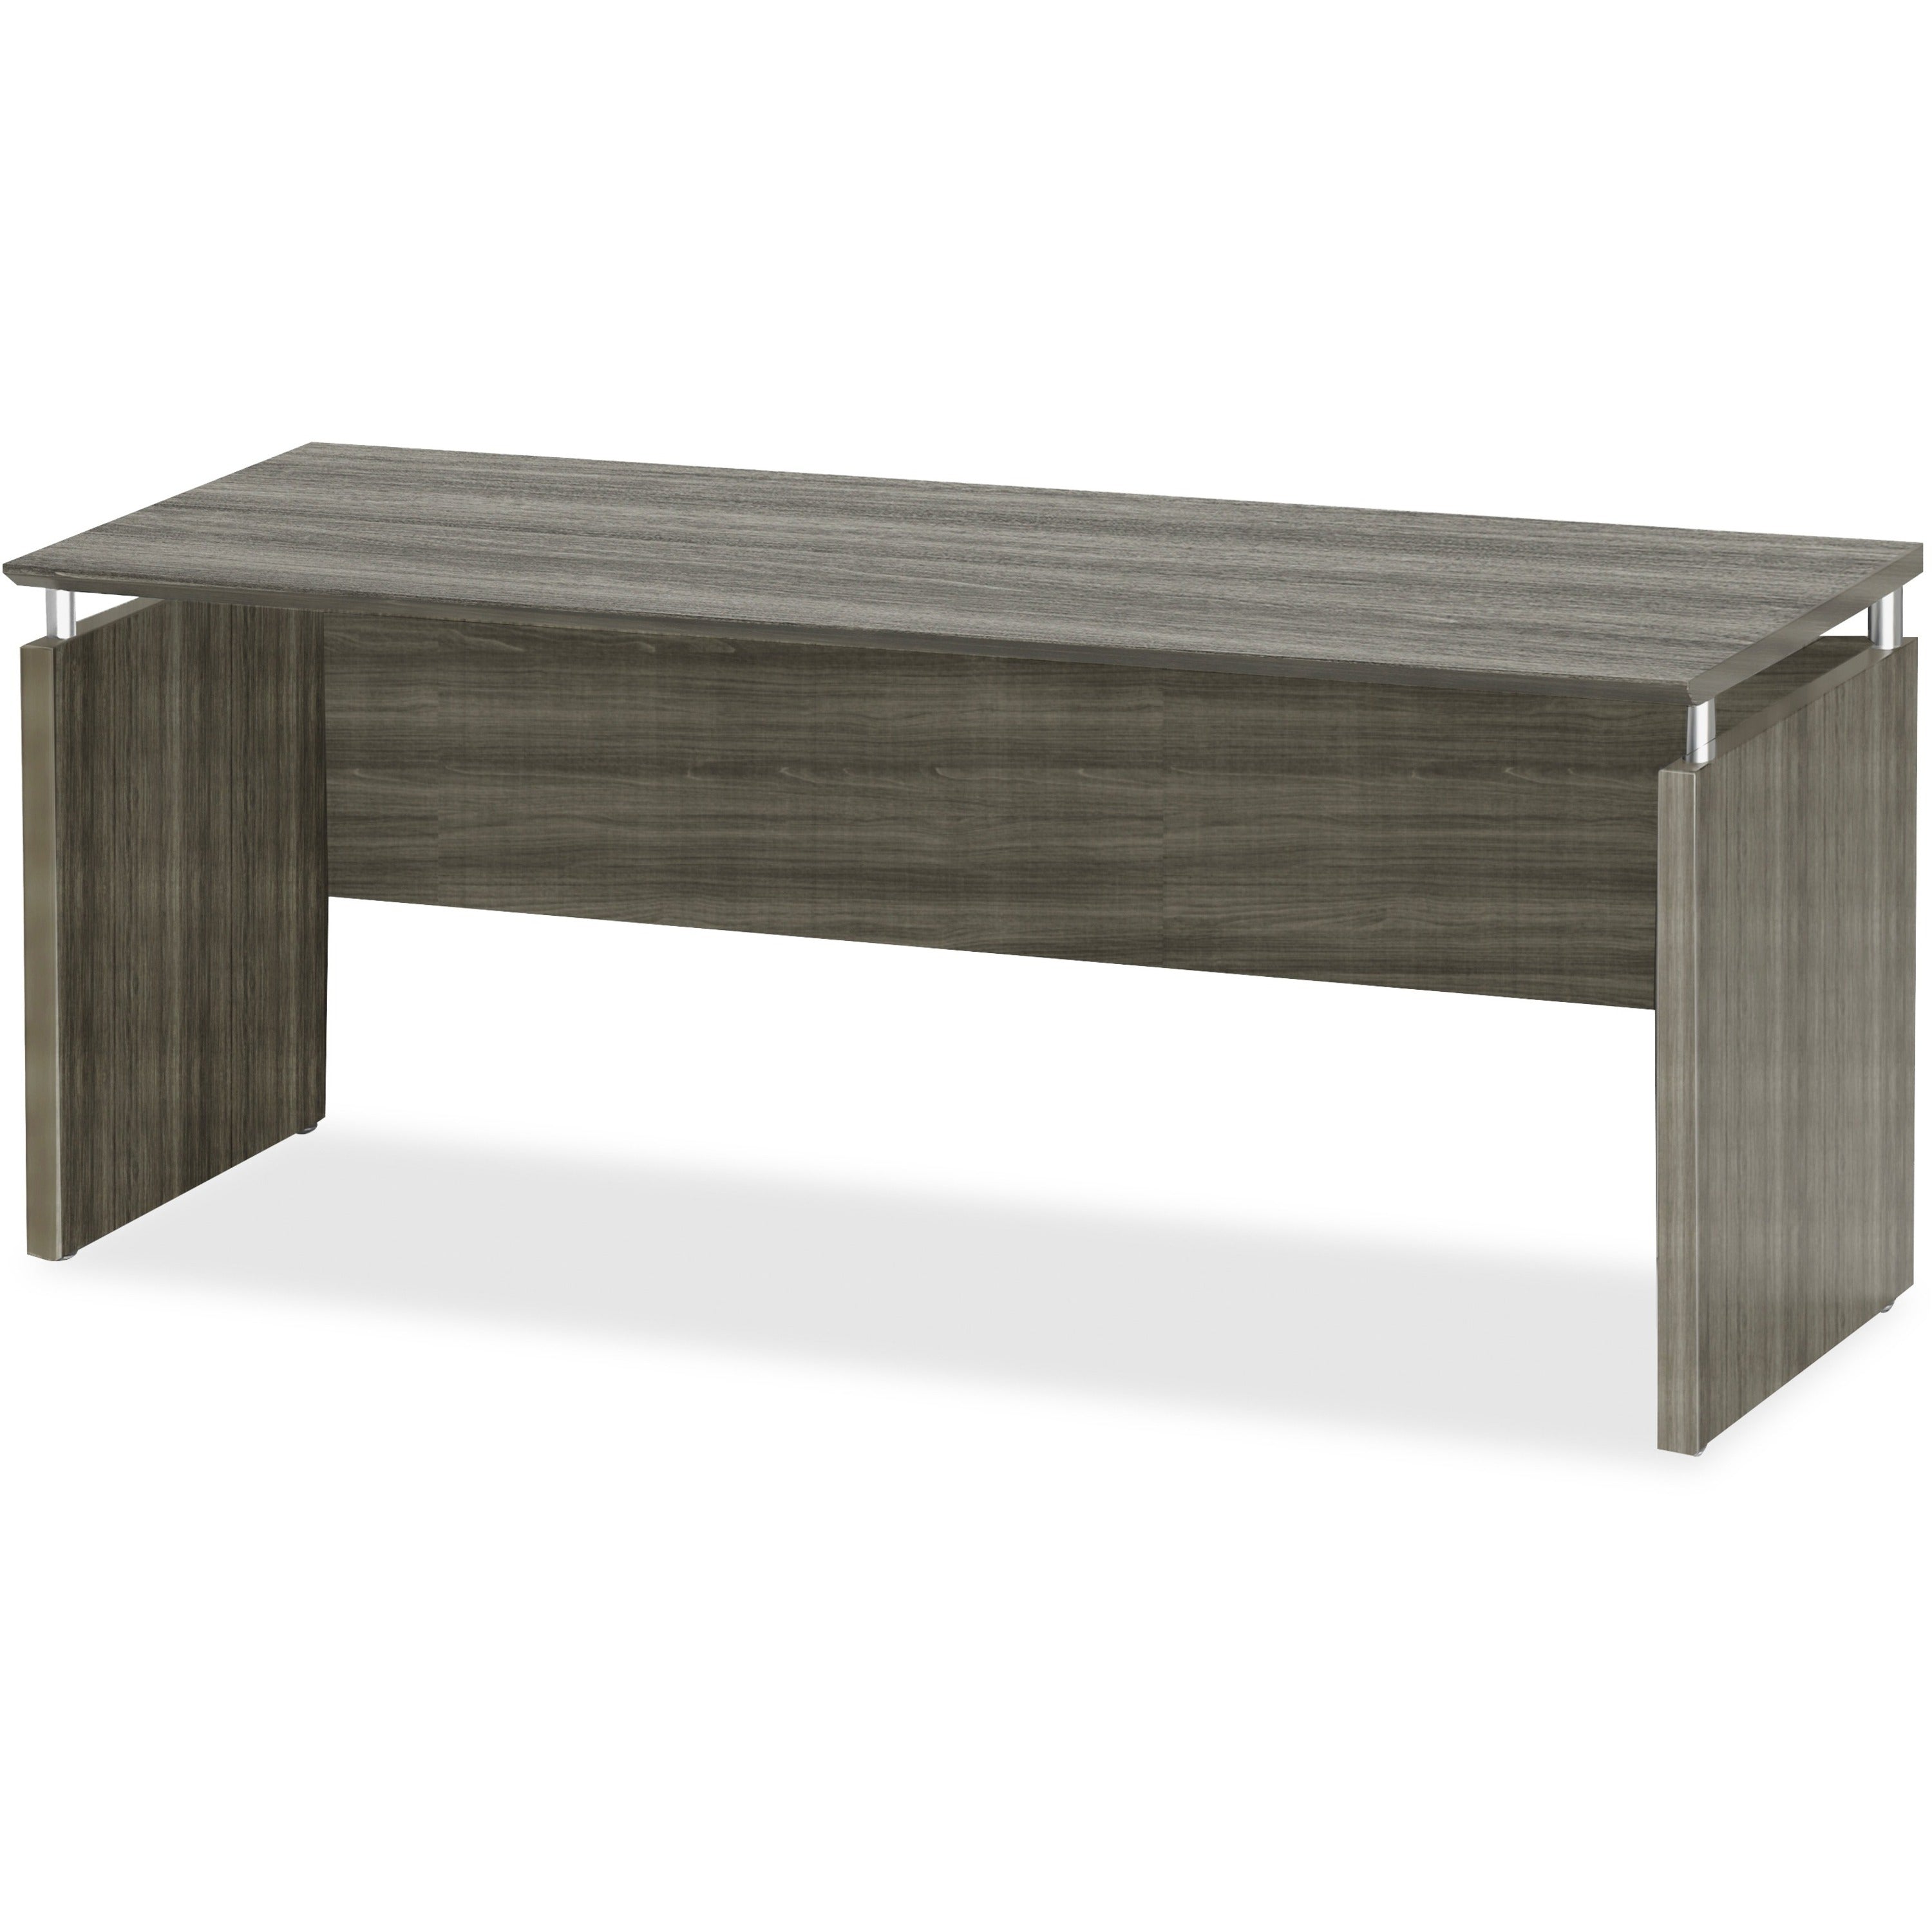 Mayline Medina Credenza - 72" x 20" x 1" x 29.5" - Beveled Edge - Finish: Gray Steel Laminate - Water Resistant, Stain Resistant, Abrasion Resistant, Durable, Modesty Panel, Leveling Glide - 